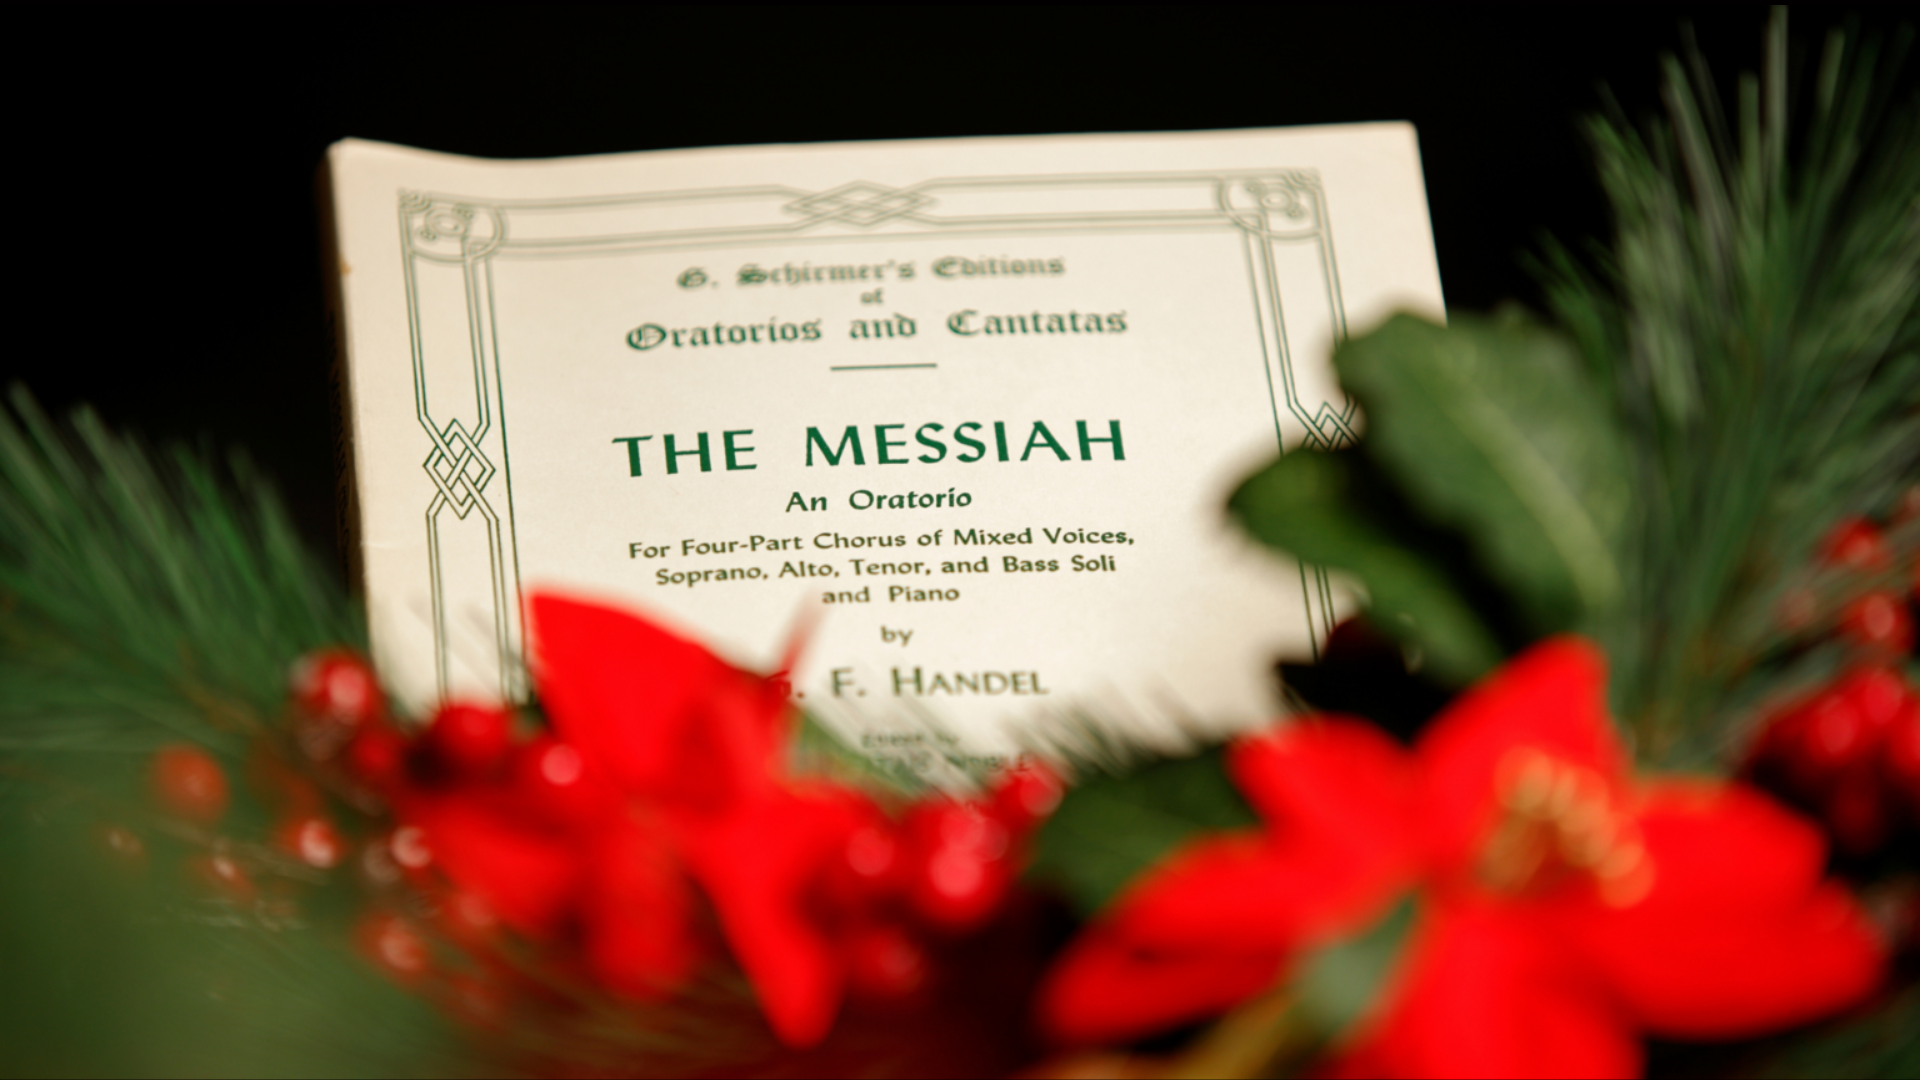 Messiah by Candlelight